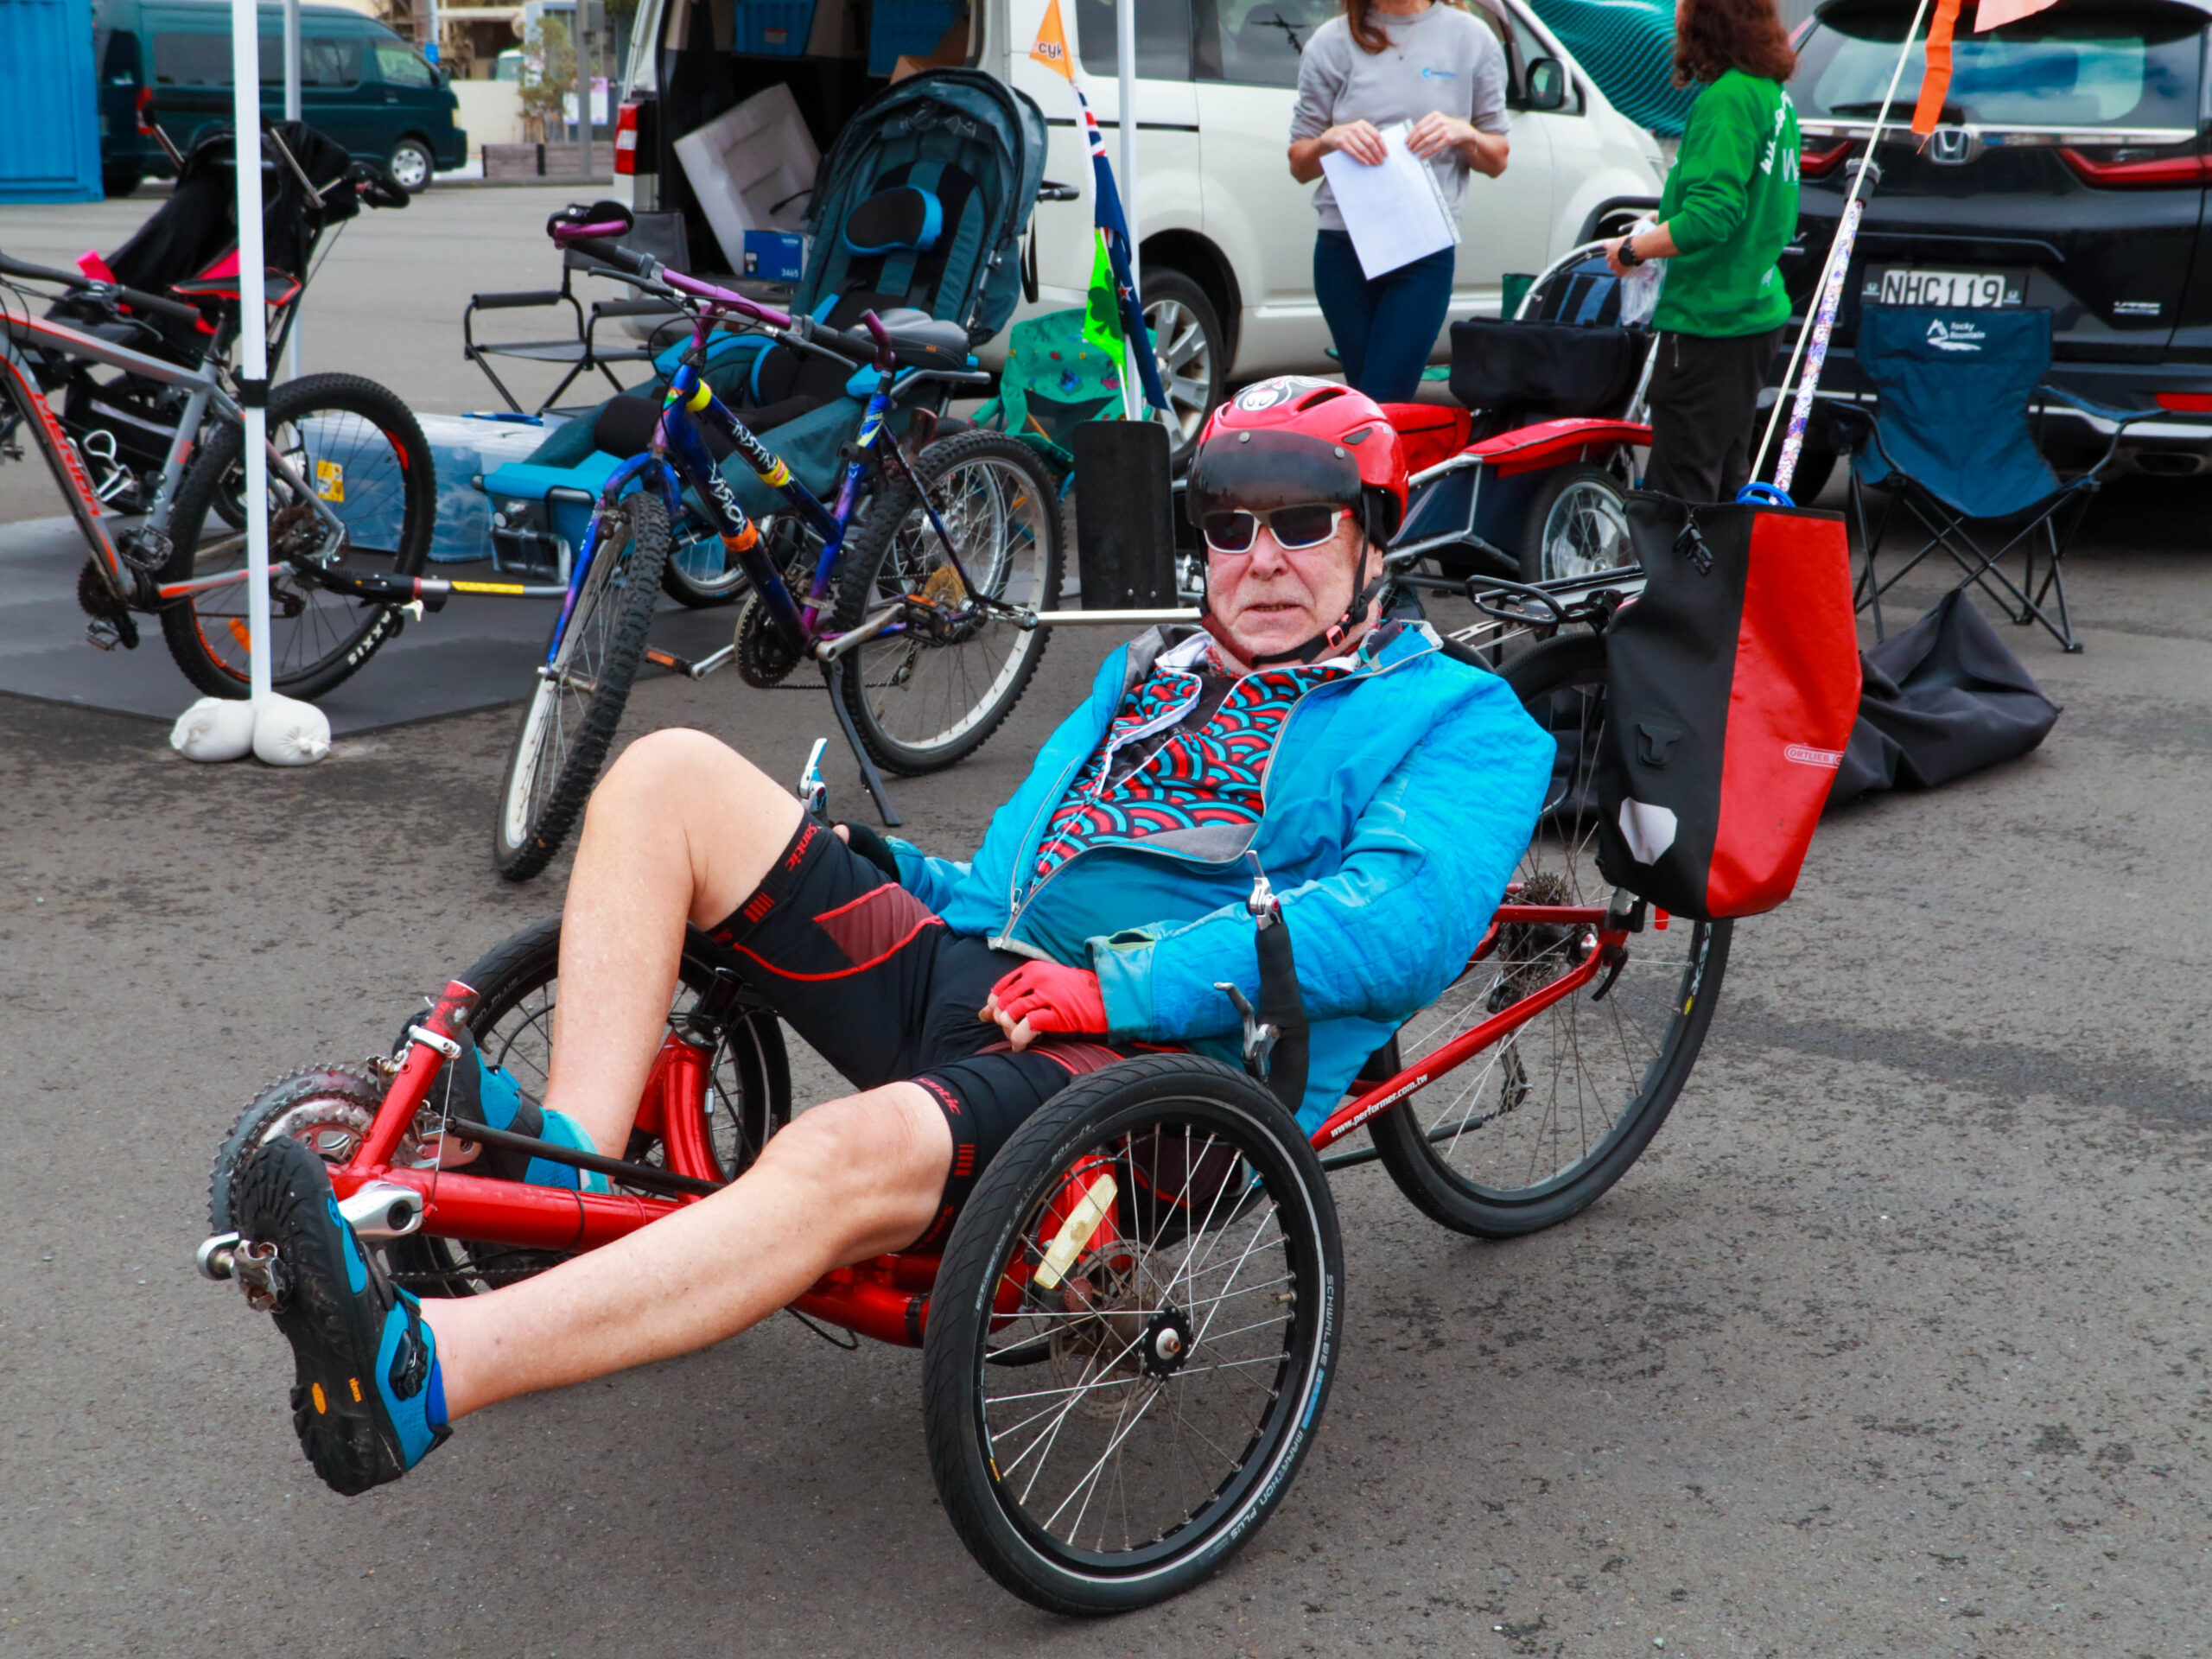 A person sitting in a recumbent cycle